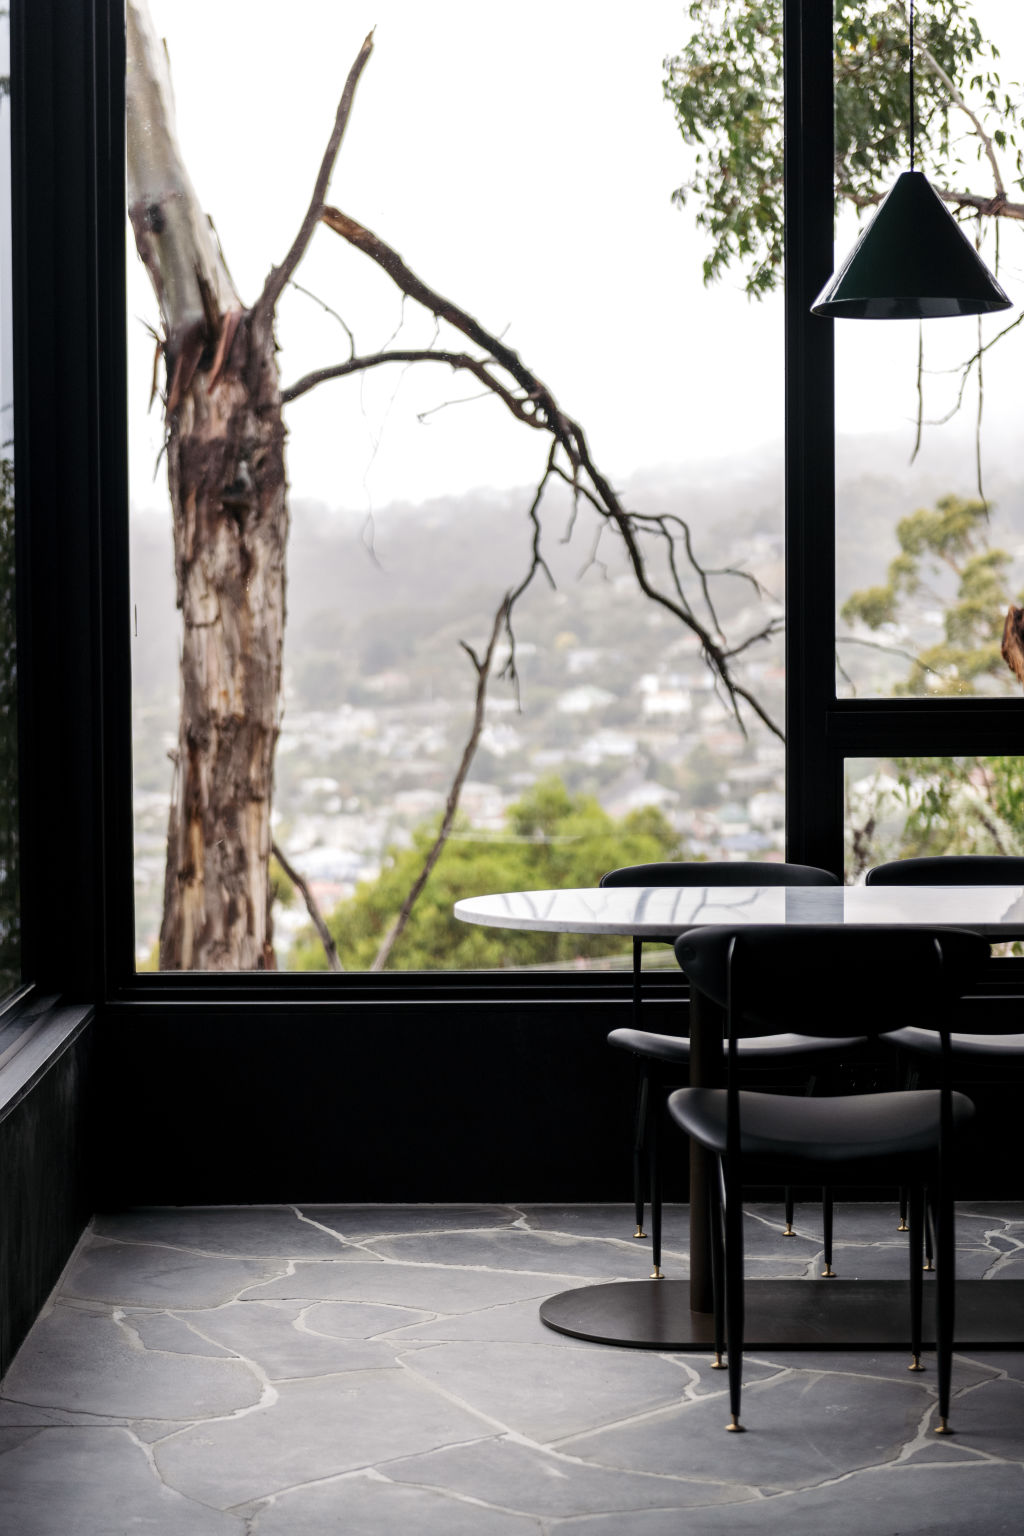 Bamford filled the home with her favourite Australian designers and artists. Photo: Lauren Bamford